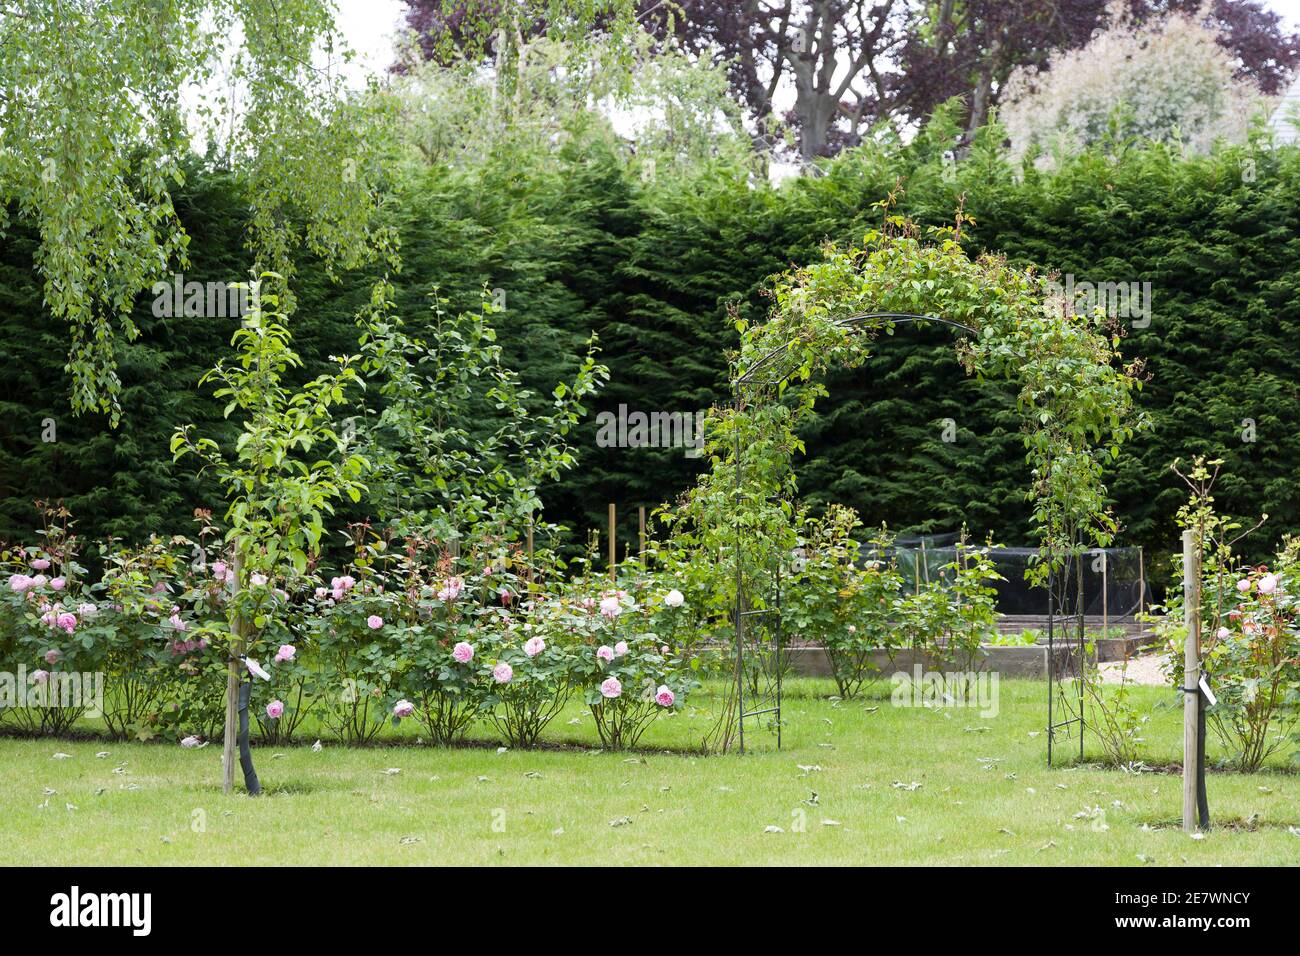 UK landscaped garden with hedge roses, rose arch and leylandii hedge Stock Photo